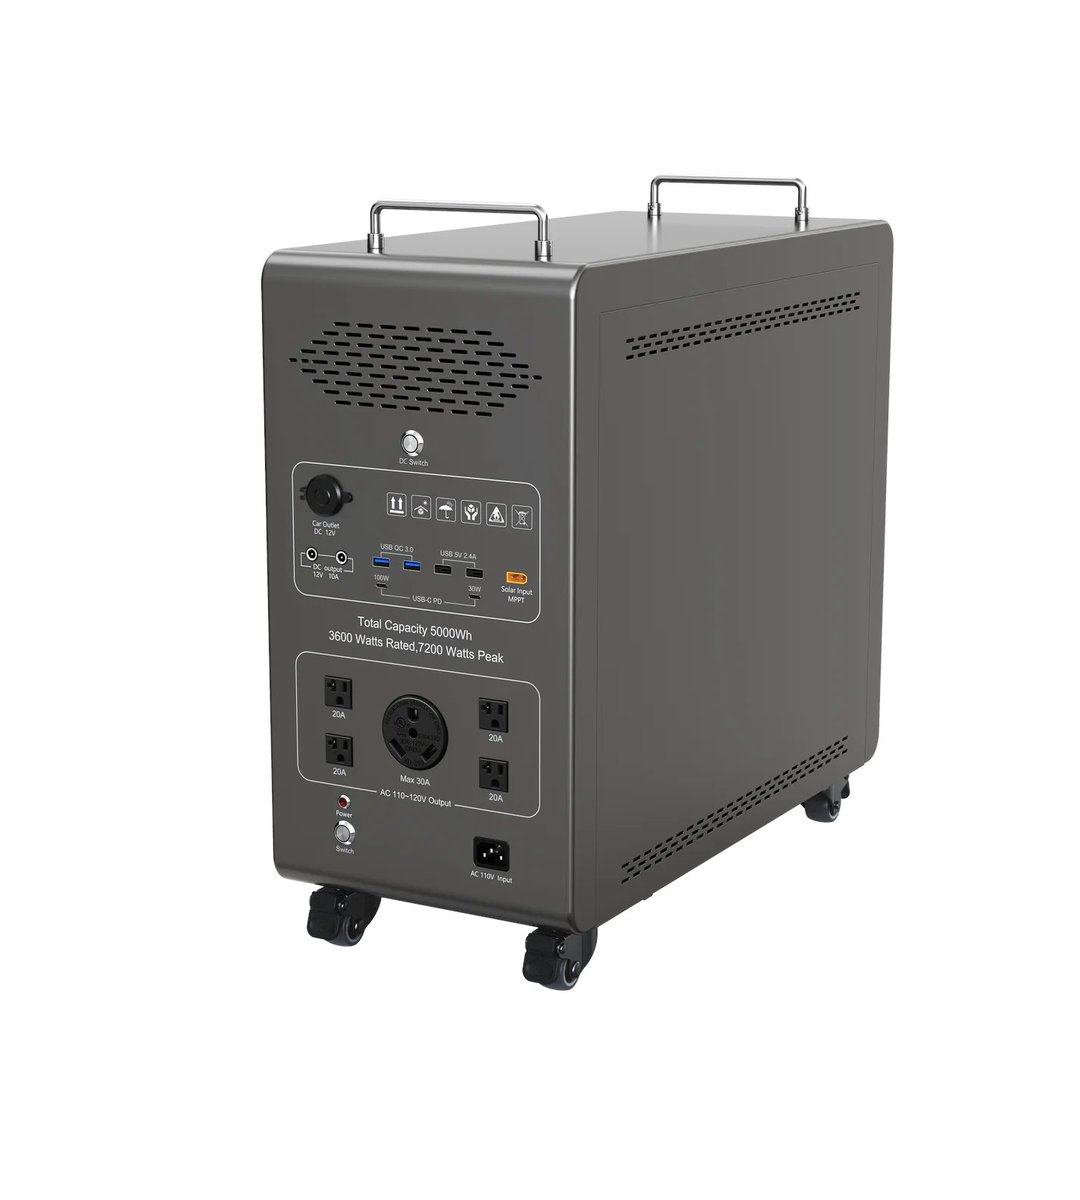 With 3.6kW power and 5kWh capacity, Dory Sentry Pro is your reliable companion for emergency and backup power supply. 
#BatteryGenerator
#DorySentry
#DoryPower
#ReliablePowerSource
#PowerOutage